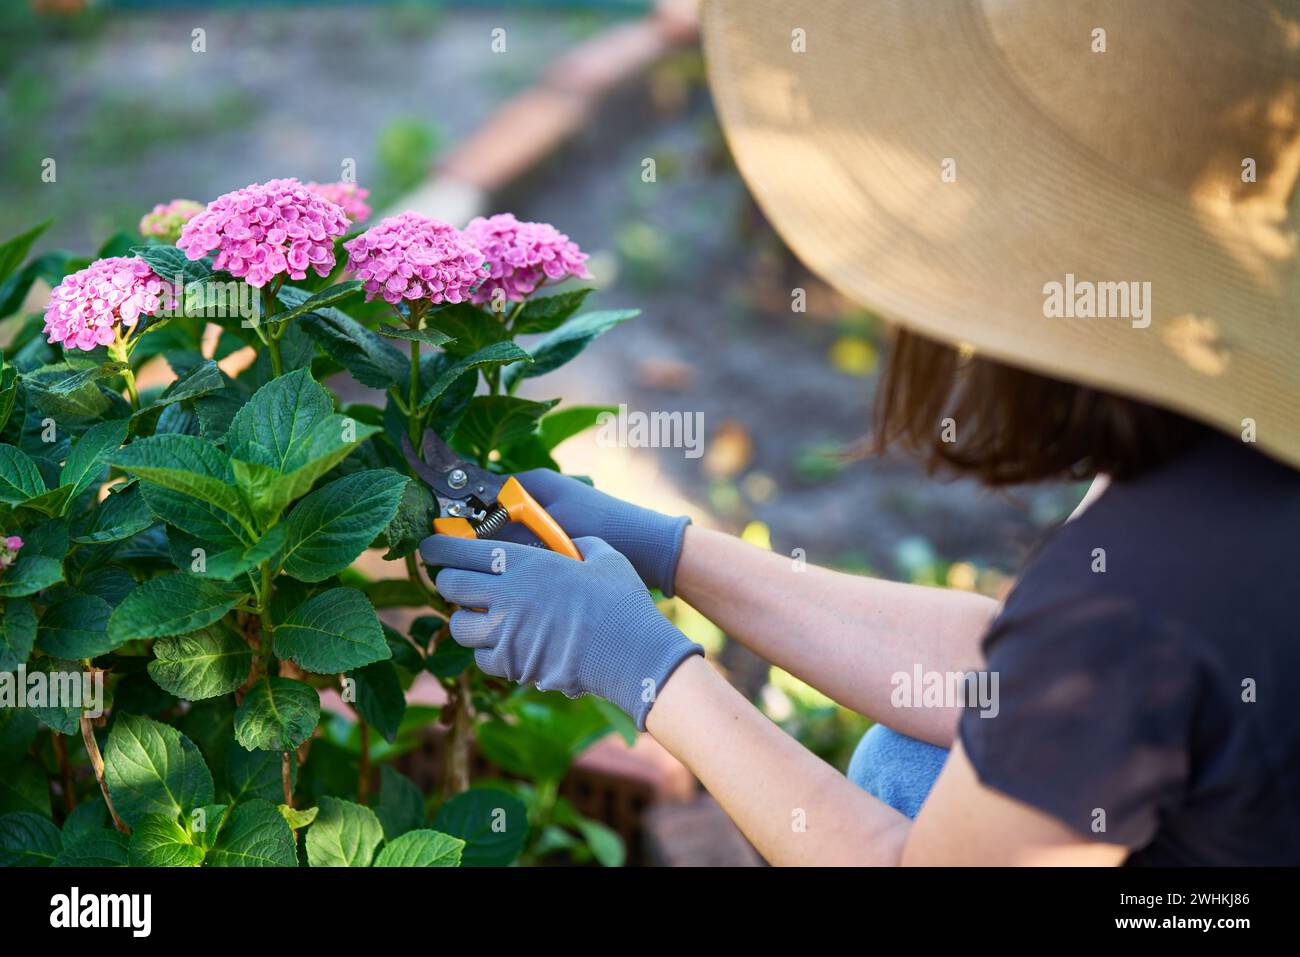 Woman gardener cutting hydrangea flowers off with pruner for bouquet. Stock Photo